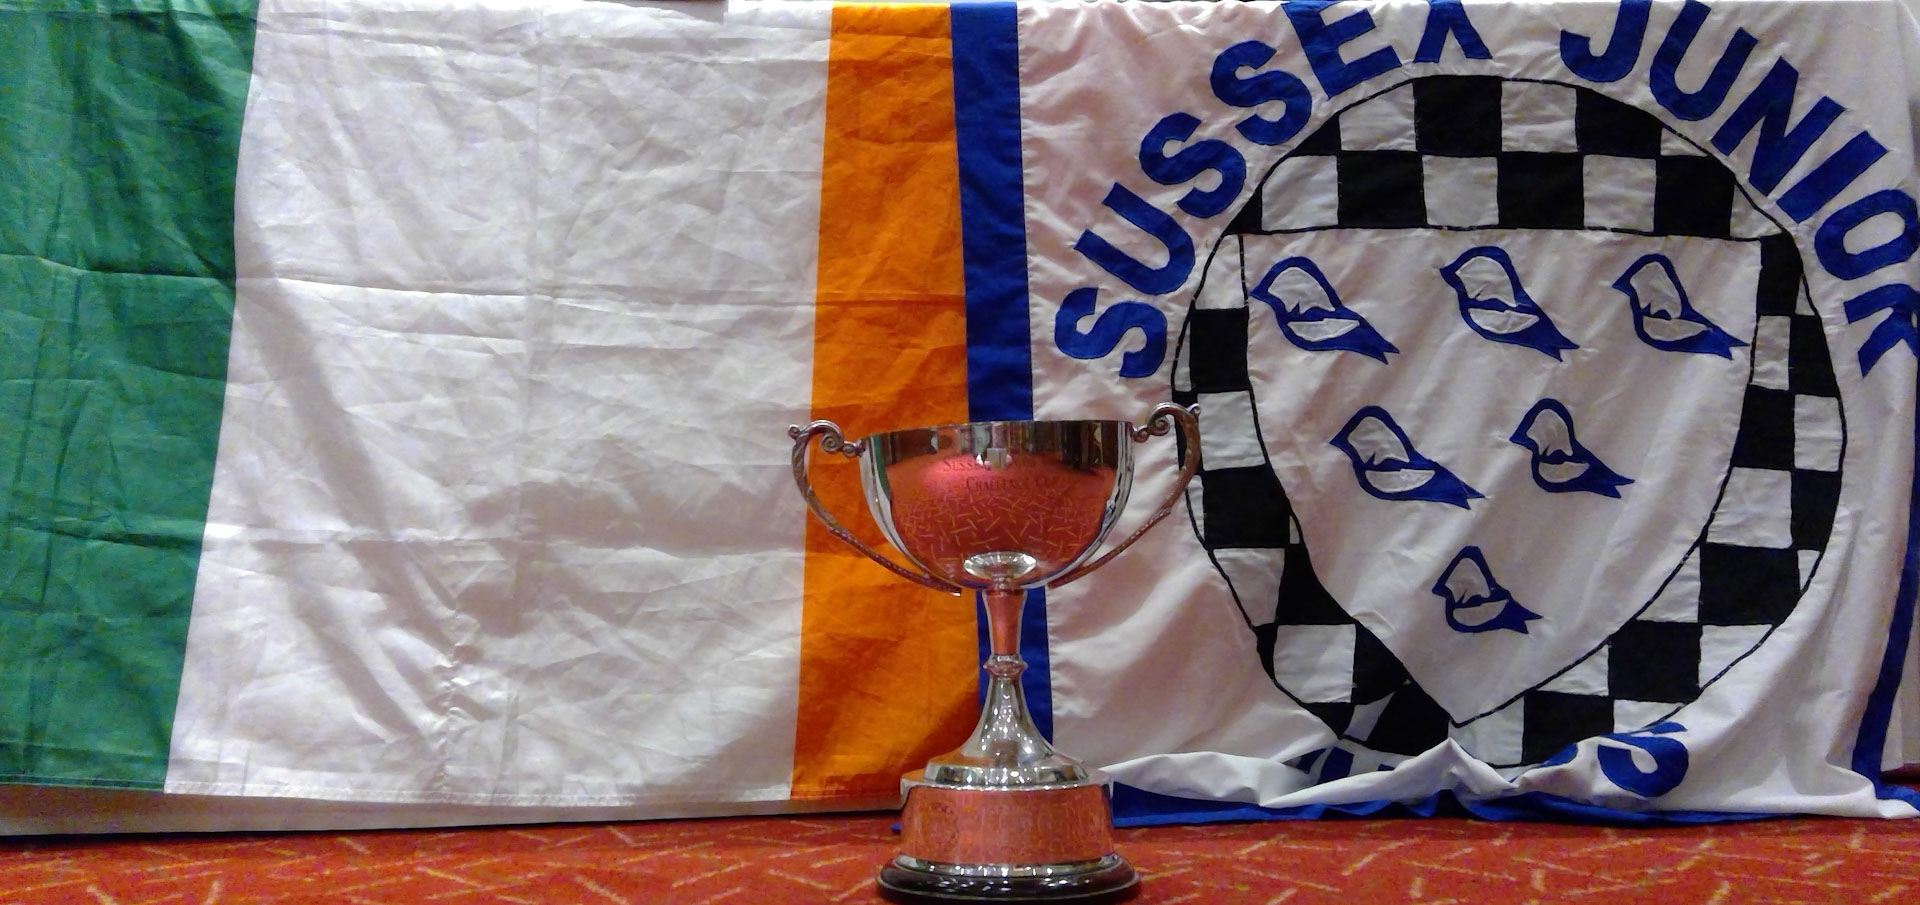 SPMC 2019 - Cup and Flags